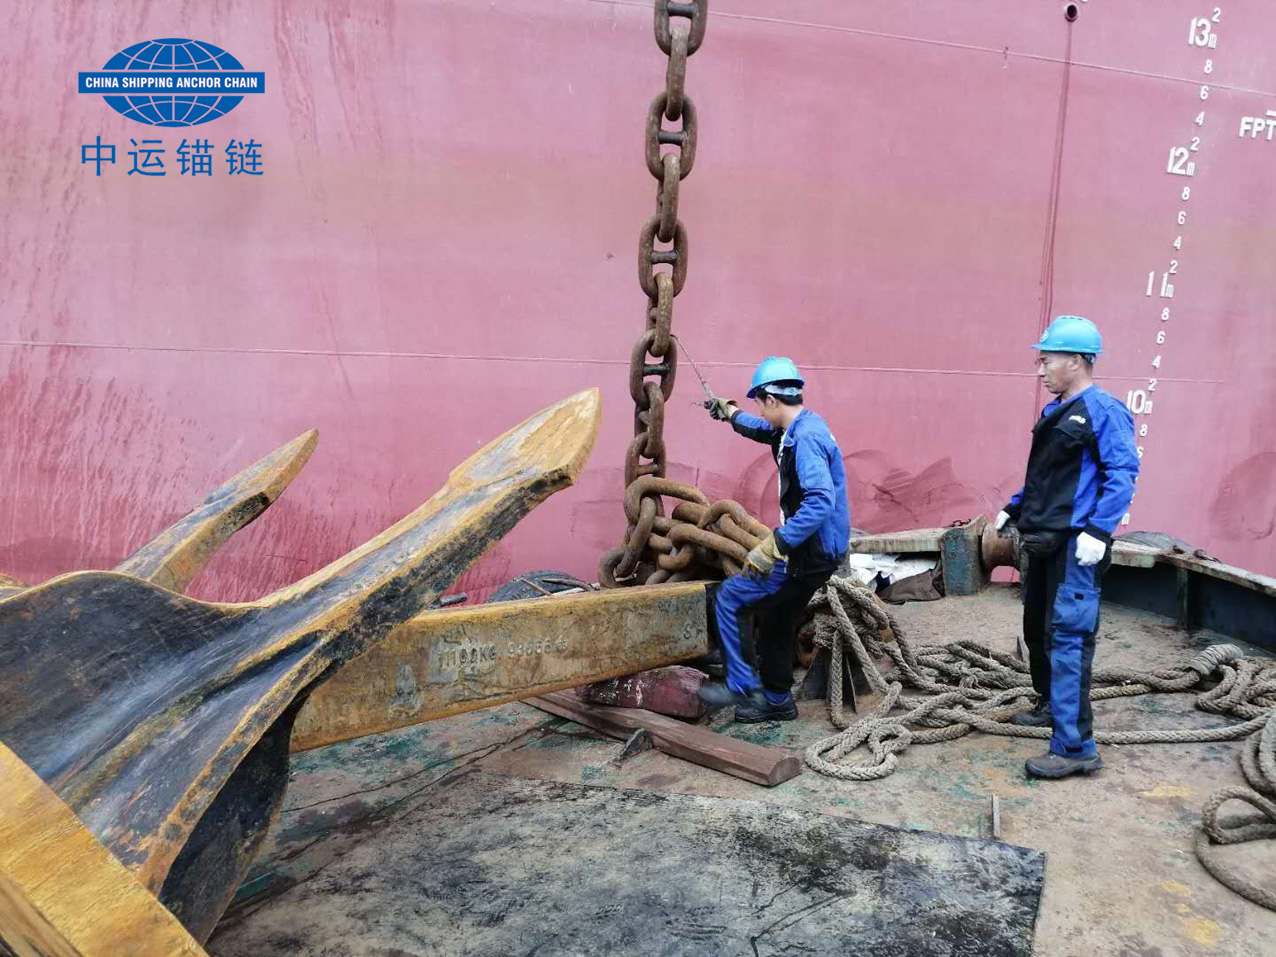 The maintenance of anchor chains